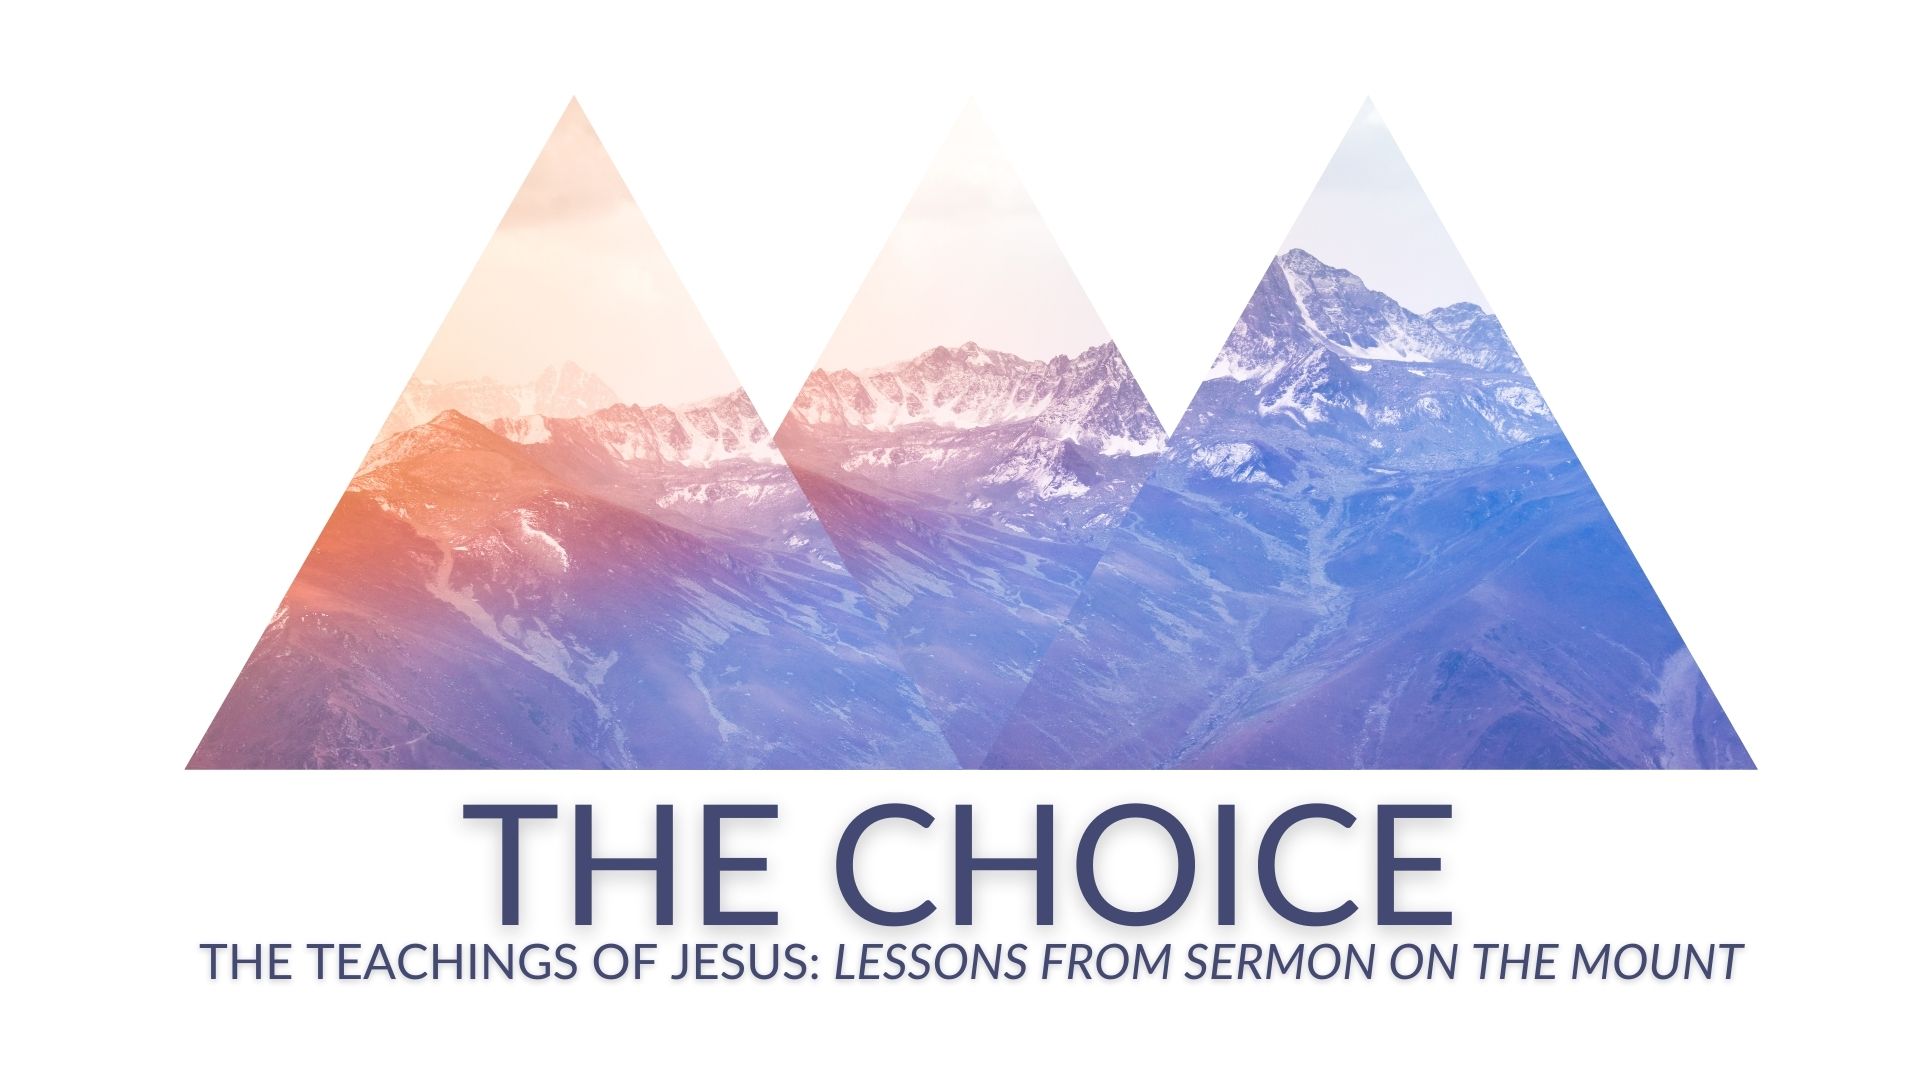 THE CHOICE - The Teachings of Jesus: Lessons from the Sermon on the Mount